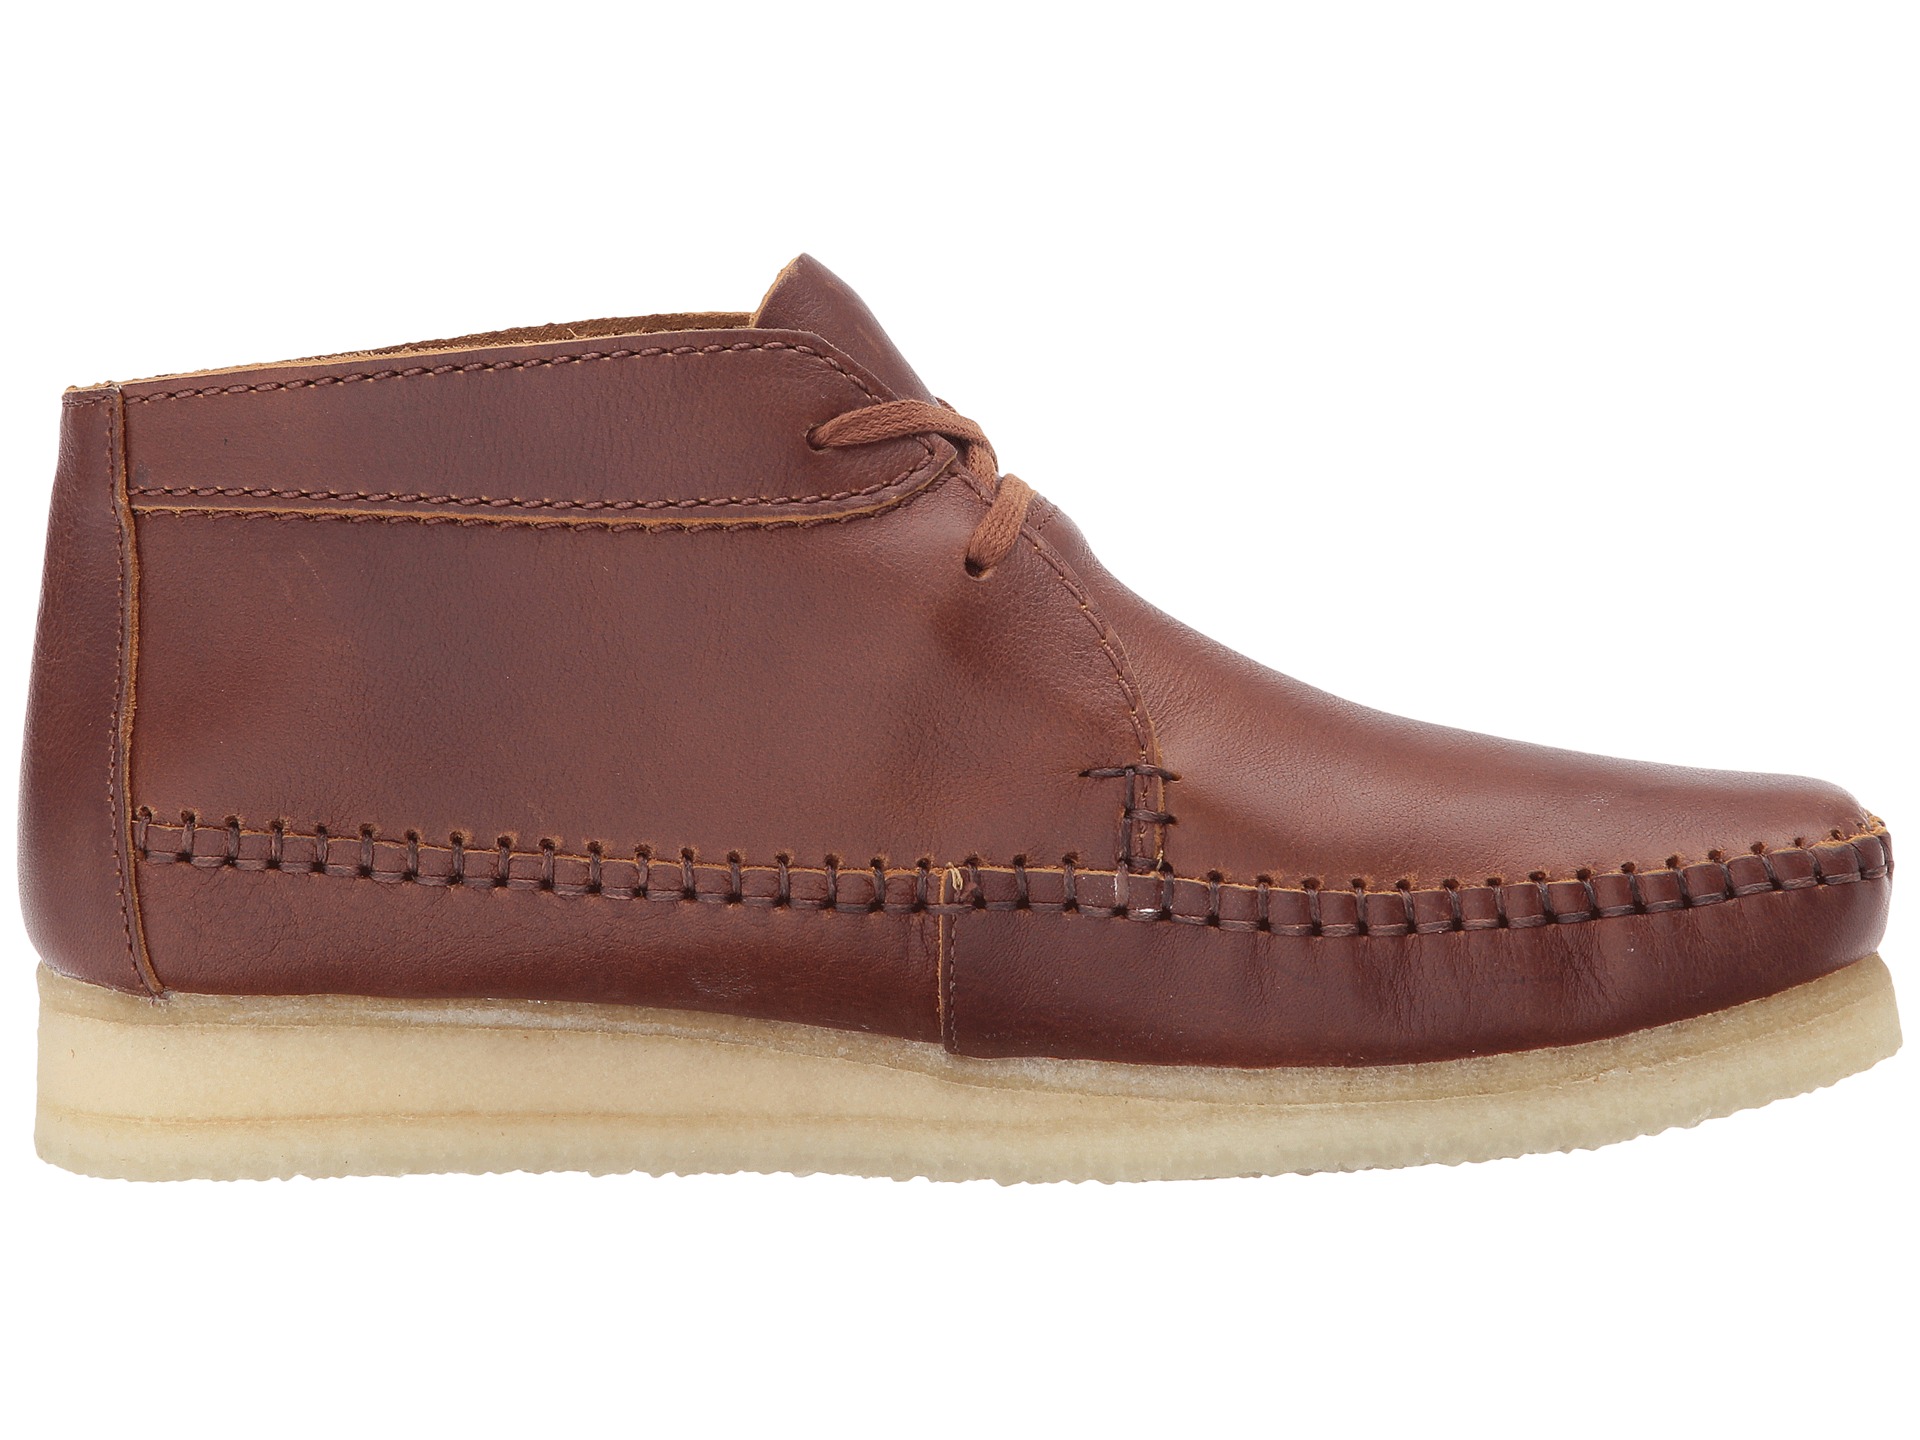 Clarks Weaver Boot at Zappos.com